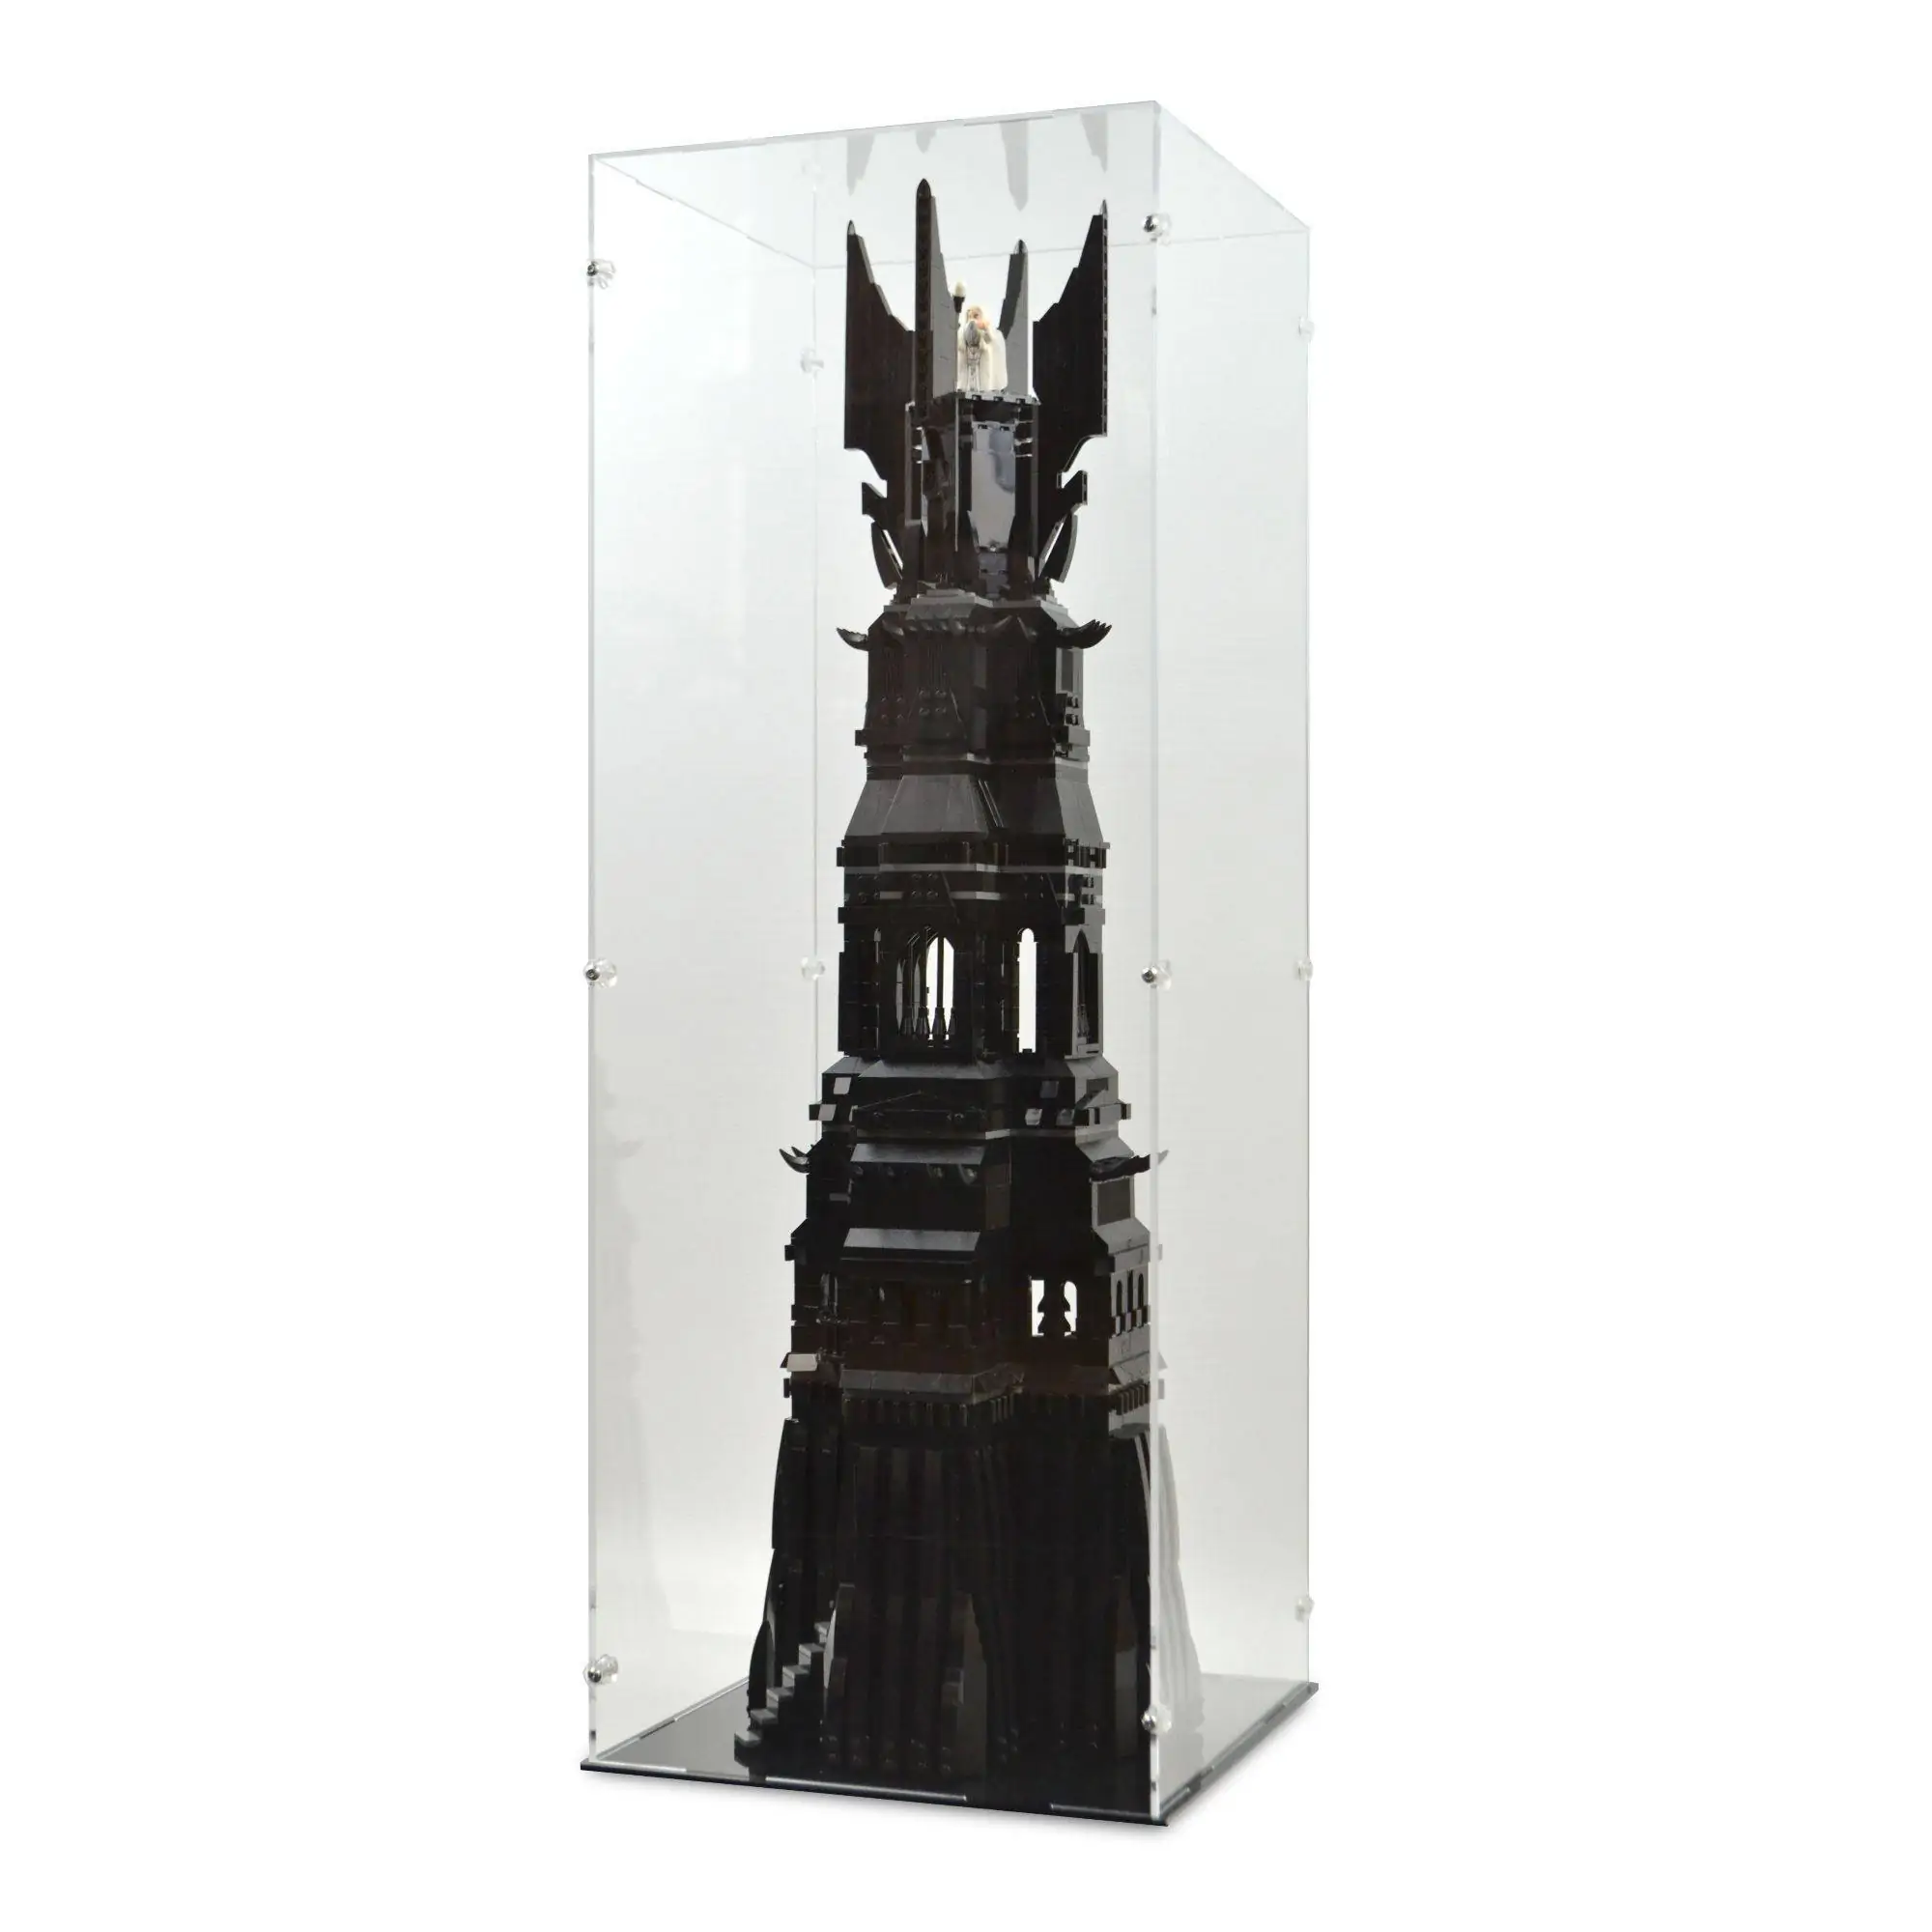 Tower of Orthanc - LEGO Lord of the Rings set 10237